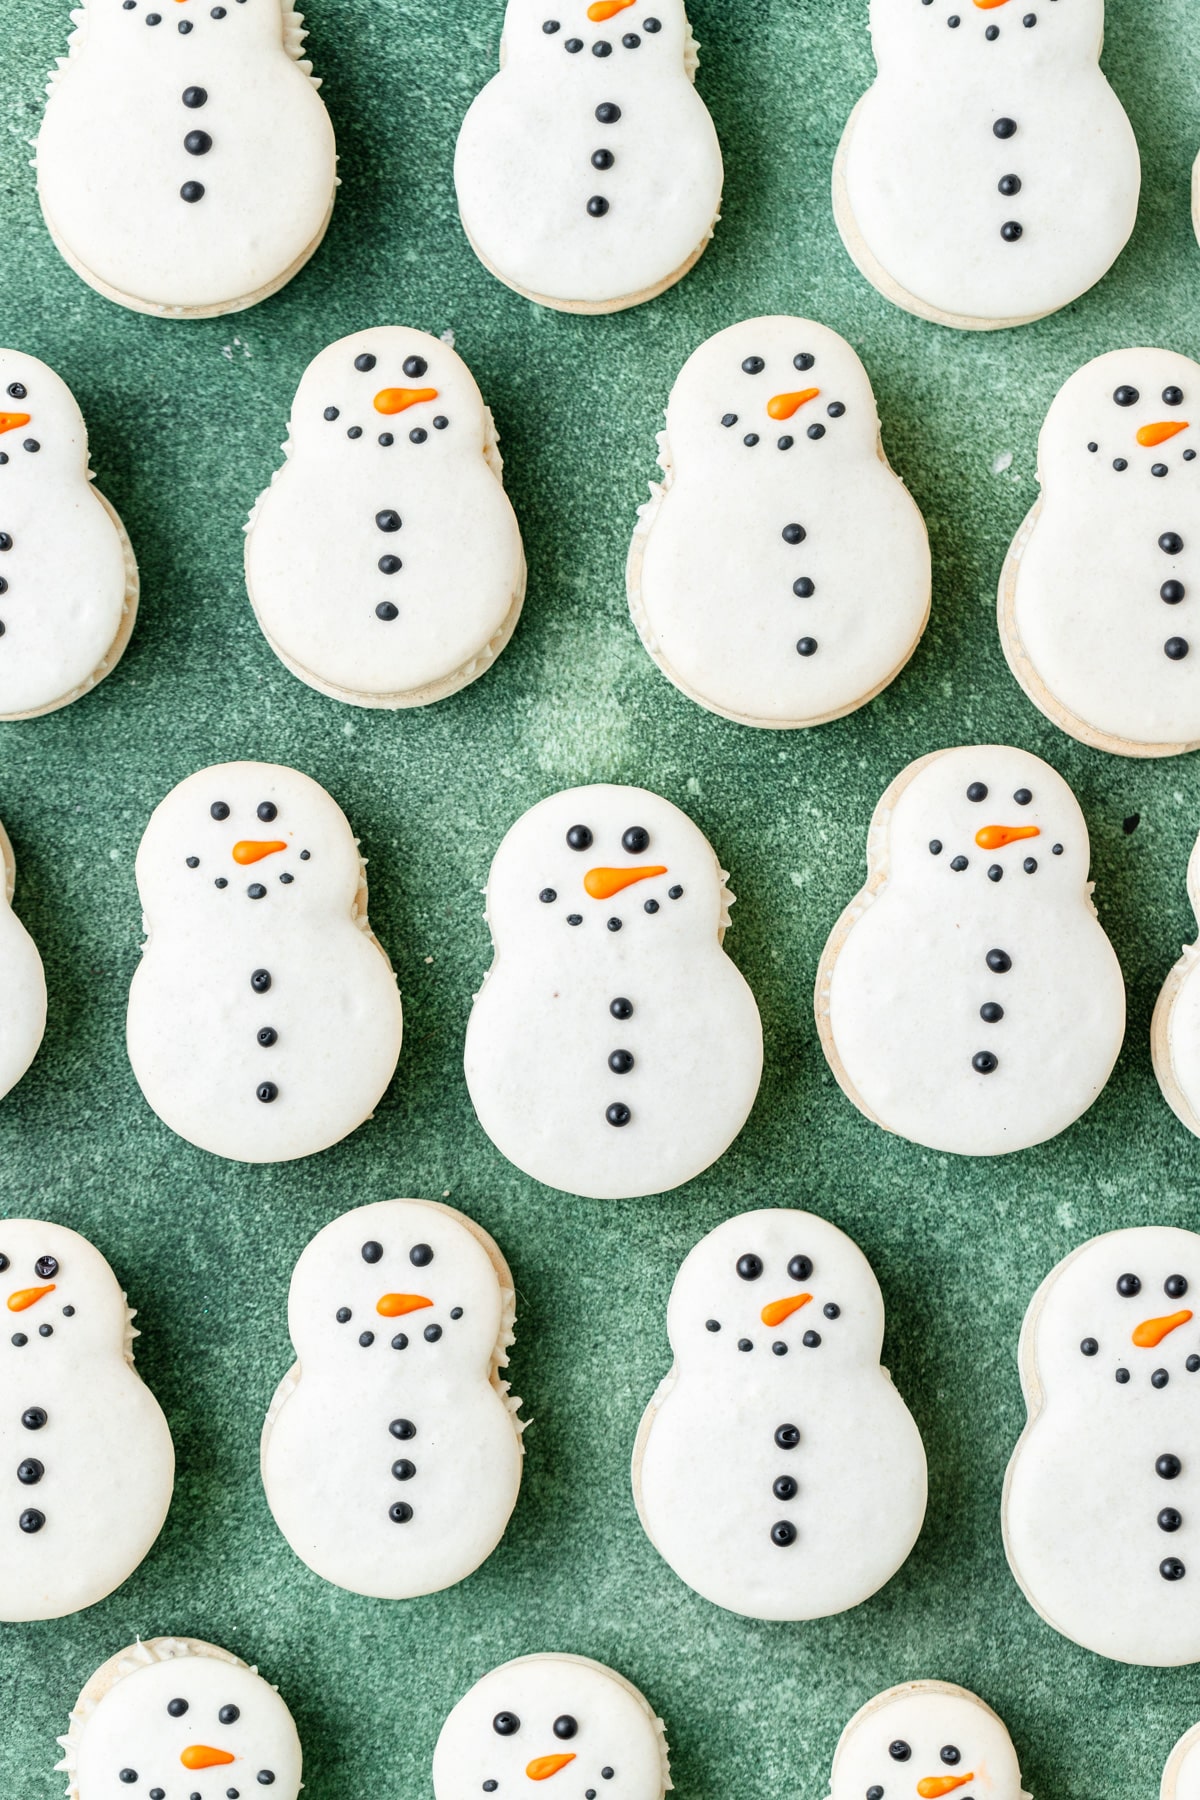 decorated snowman macarons with royal icing.